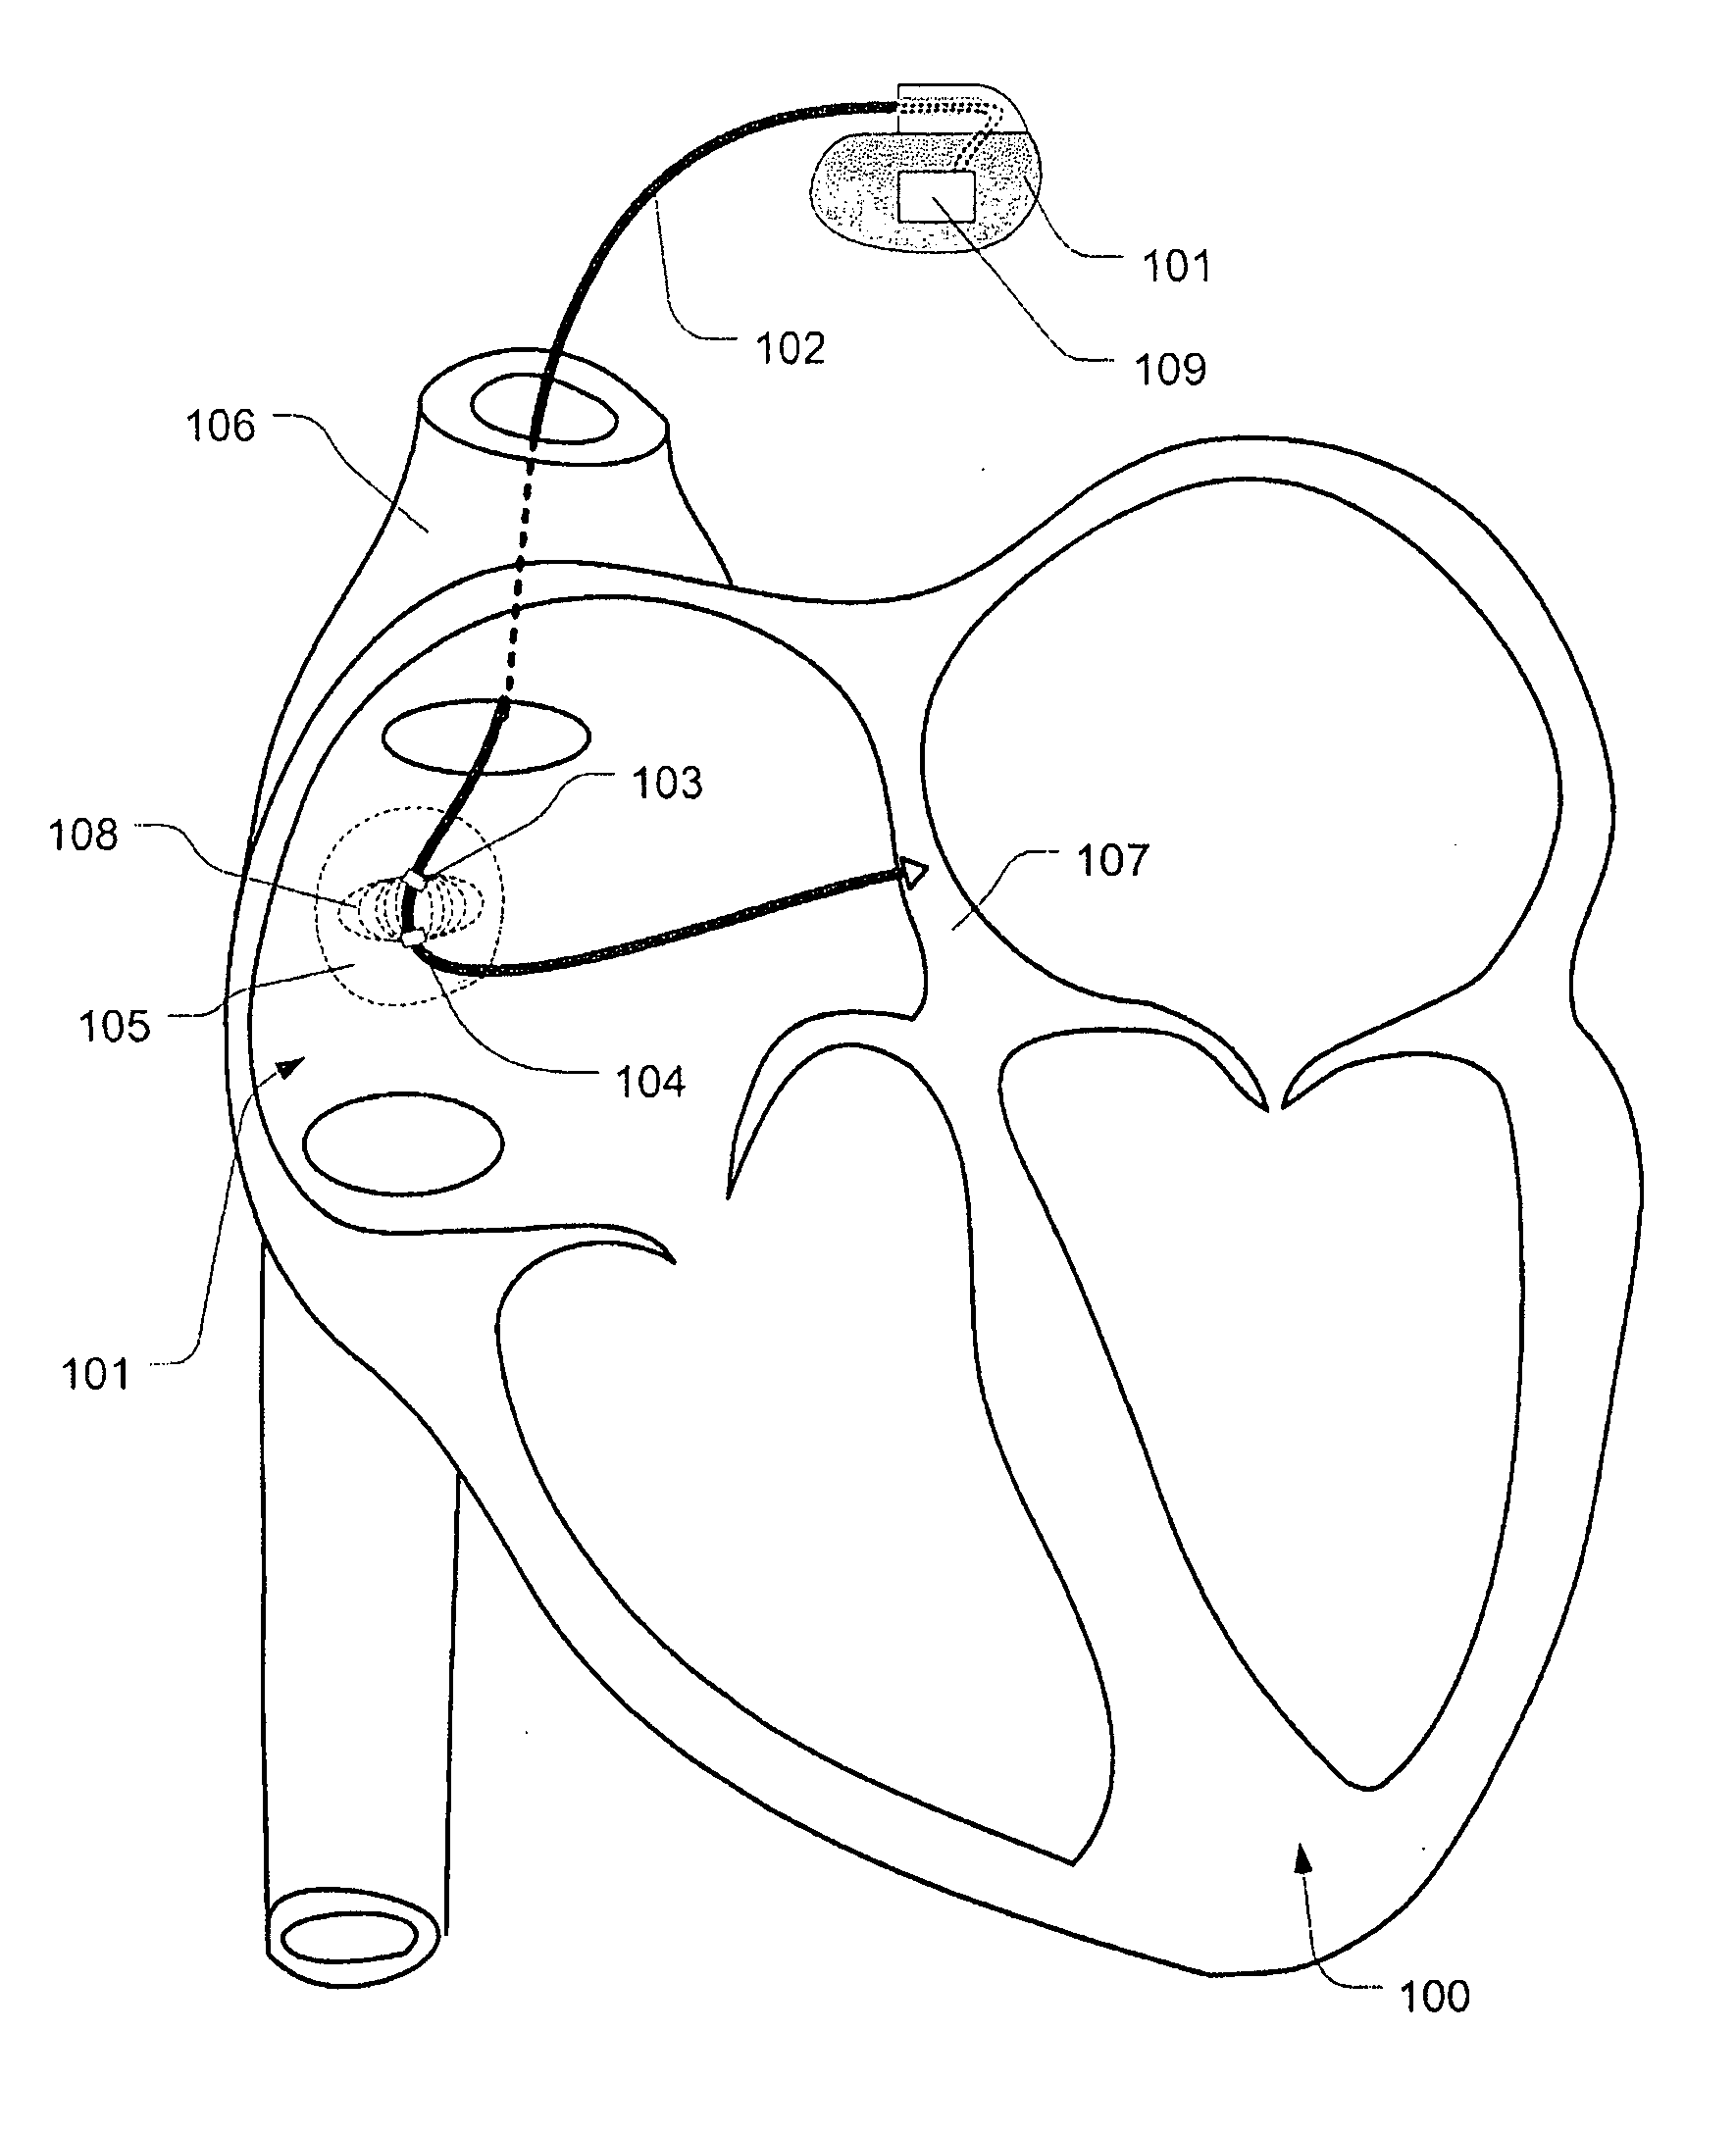 Heart rate reduction method and system